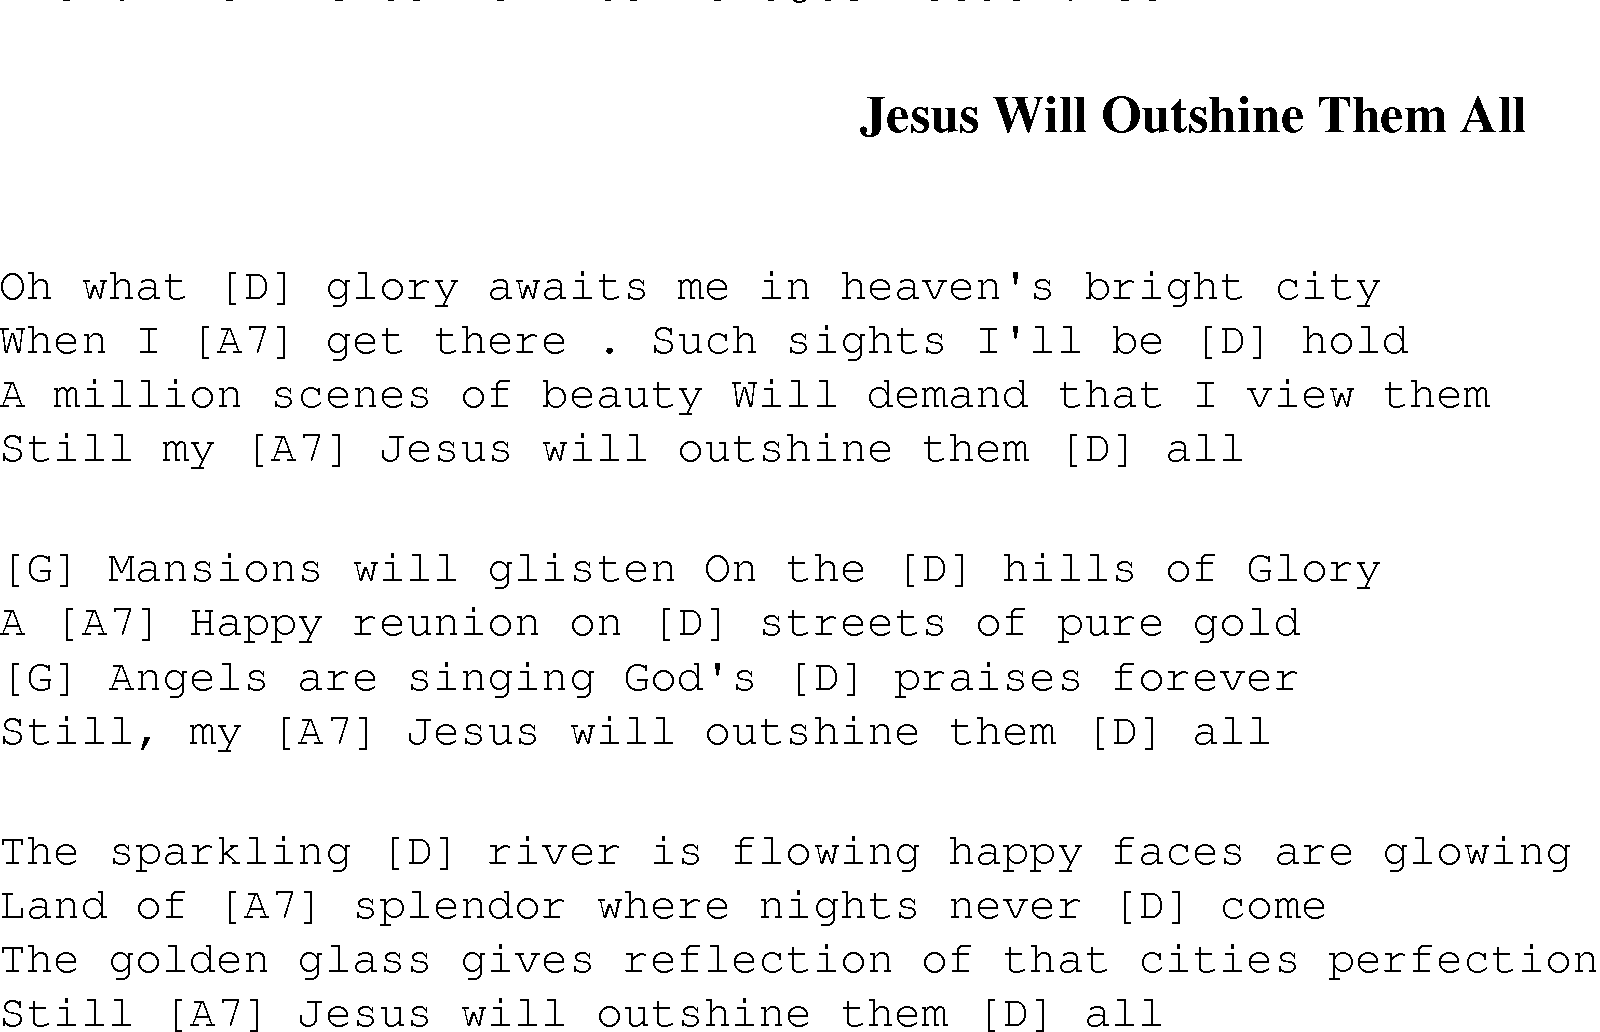 Gospel Song: jesus_will_outshine_them_all, lyrics and chords.